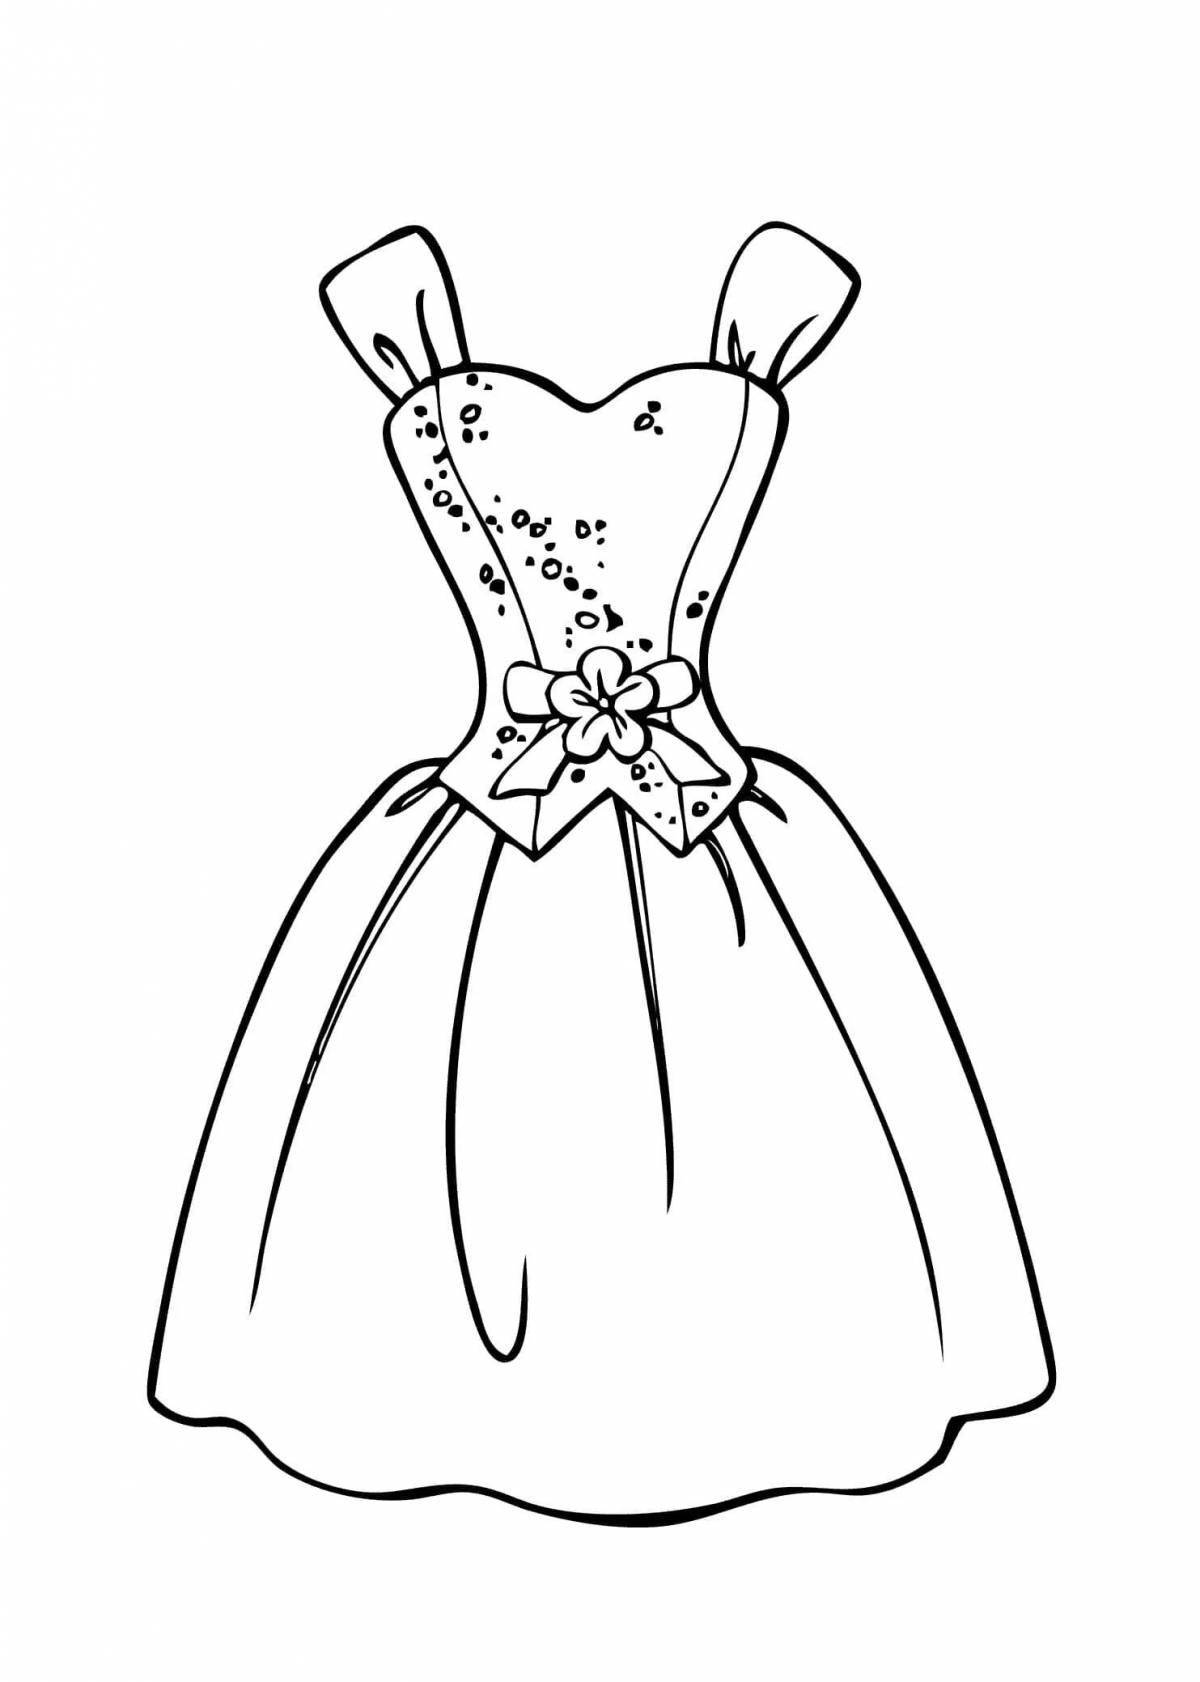 Coloring page cute fluffy dress